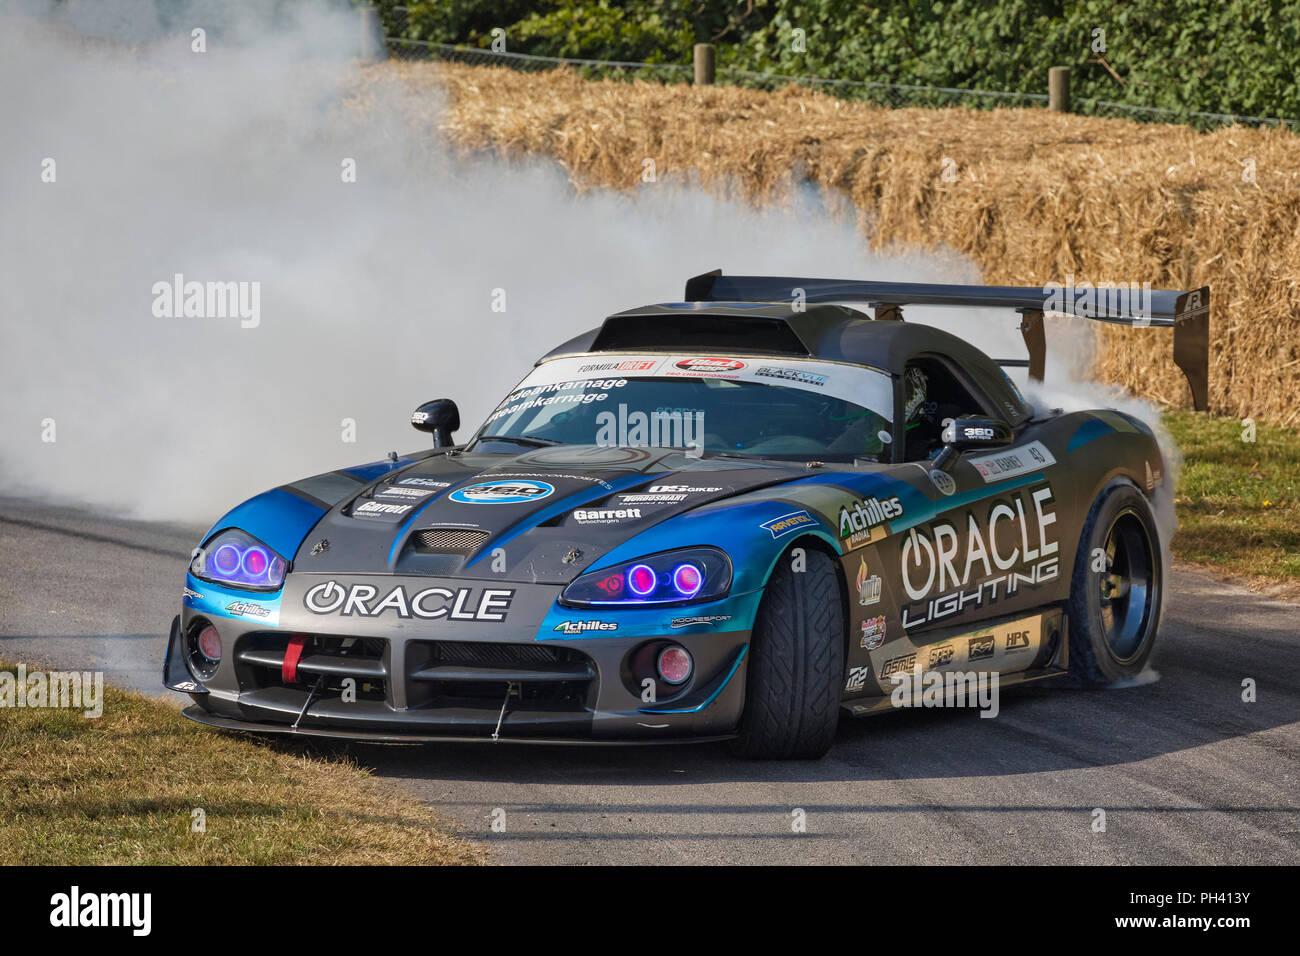 2016 Dodge Viper Formula Drift car with driver Dean Kearney burning rubber at the 2018 Goodwood Festival of Speed, Sussex, UK. Stock Photo